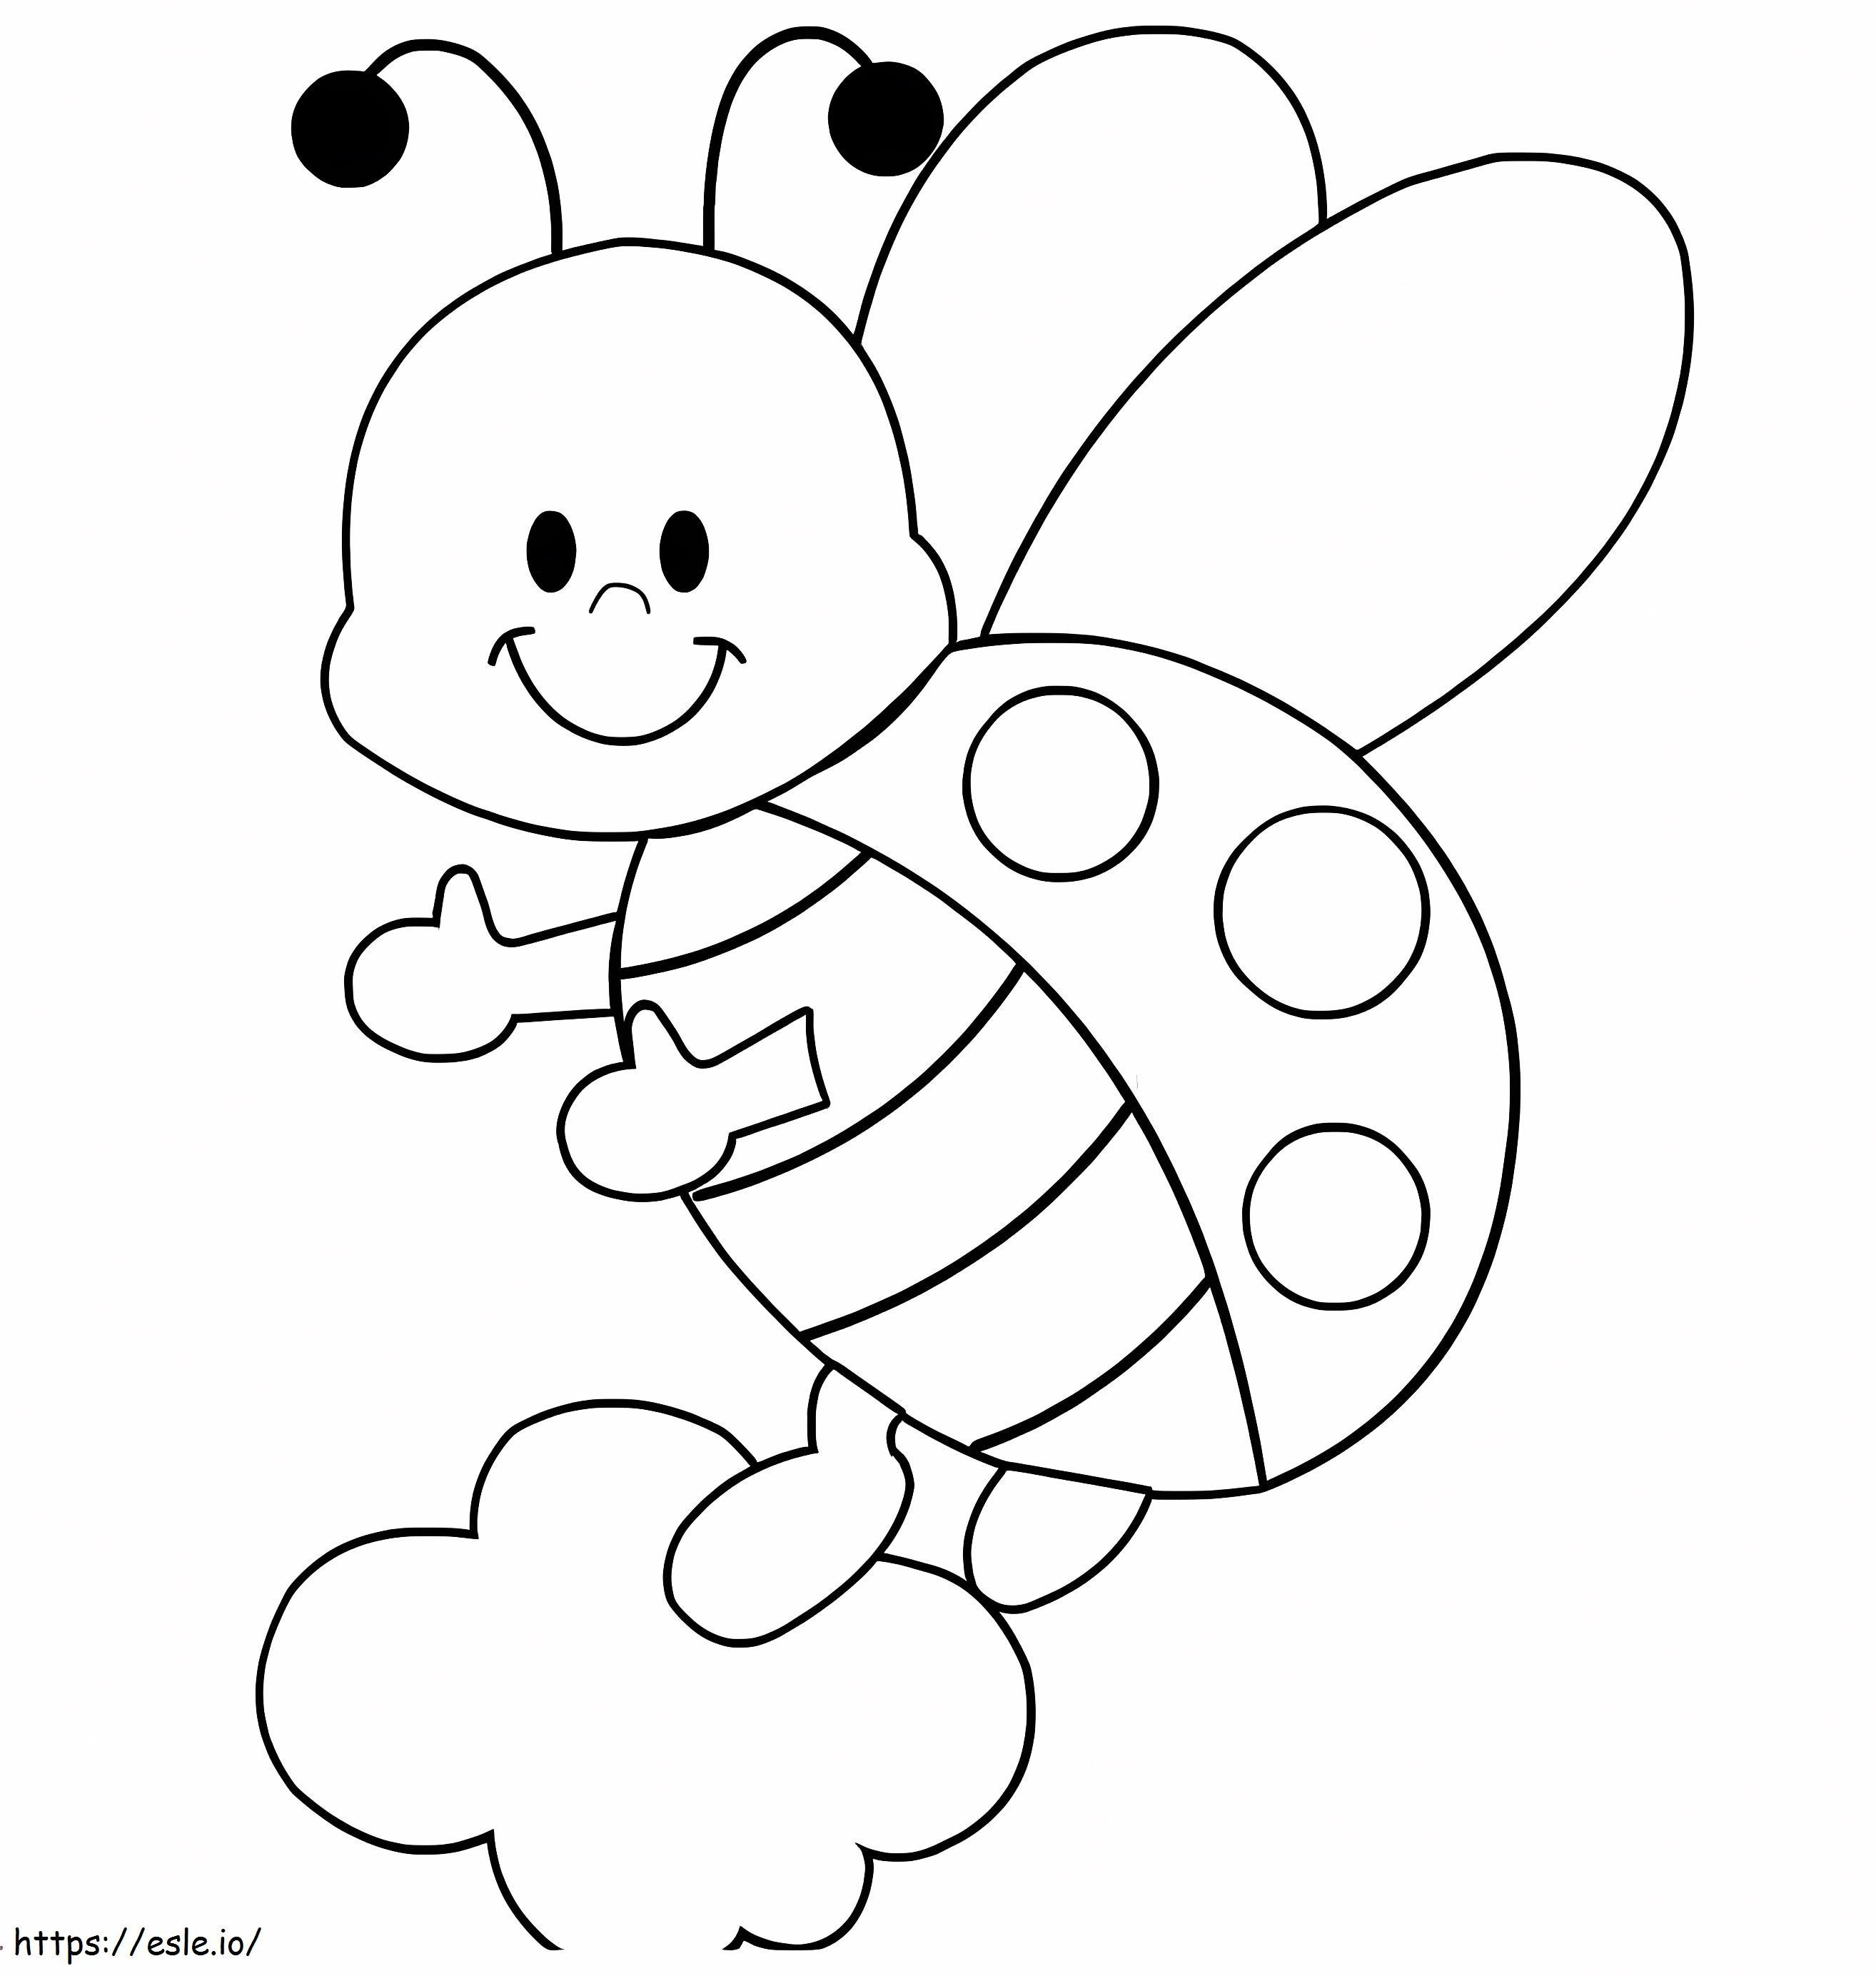 Cute Ladybug Smiling coloring page